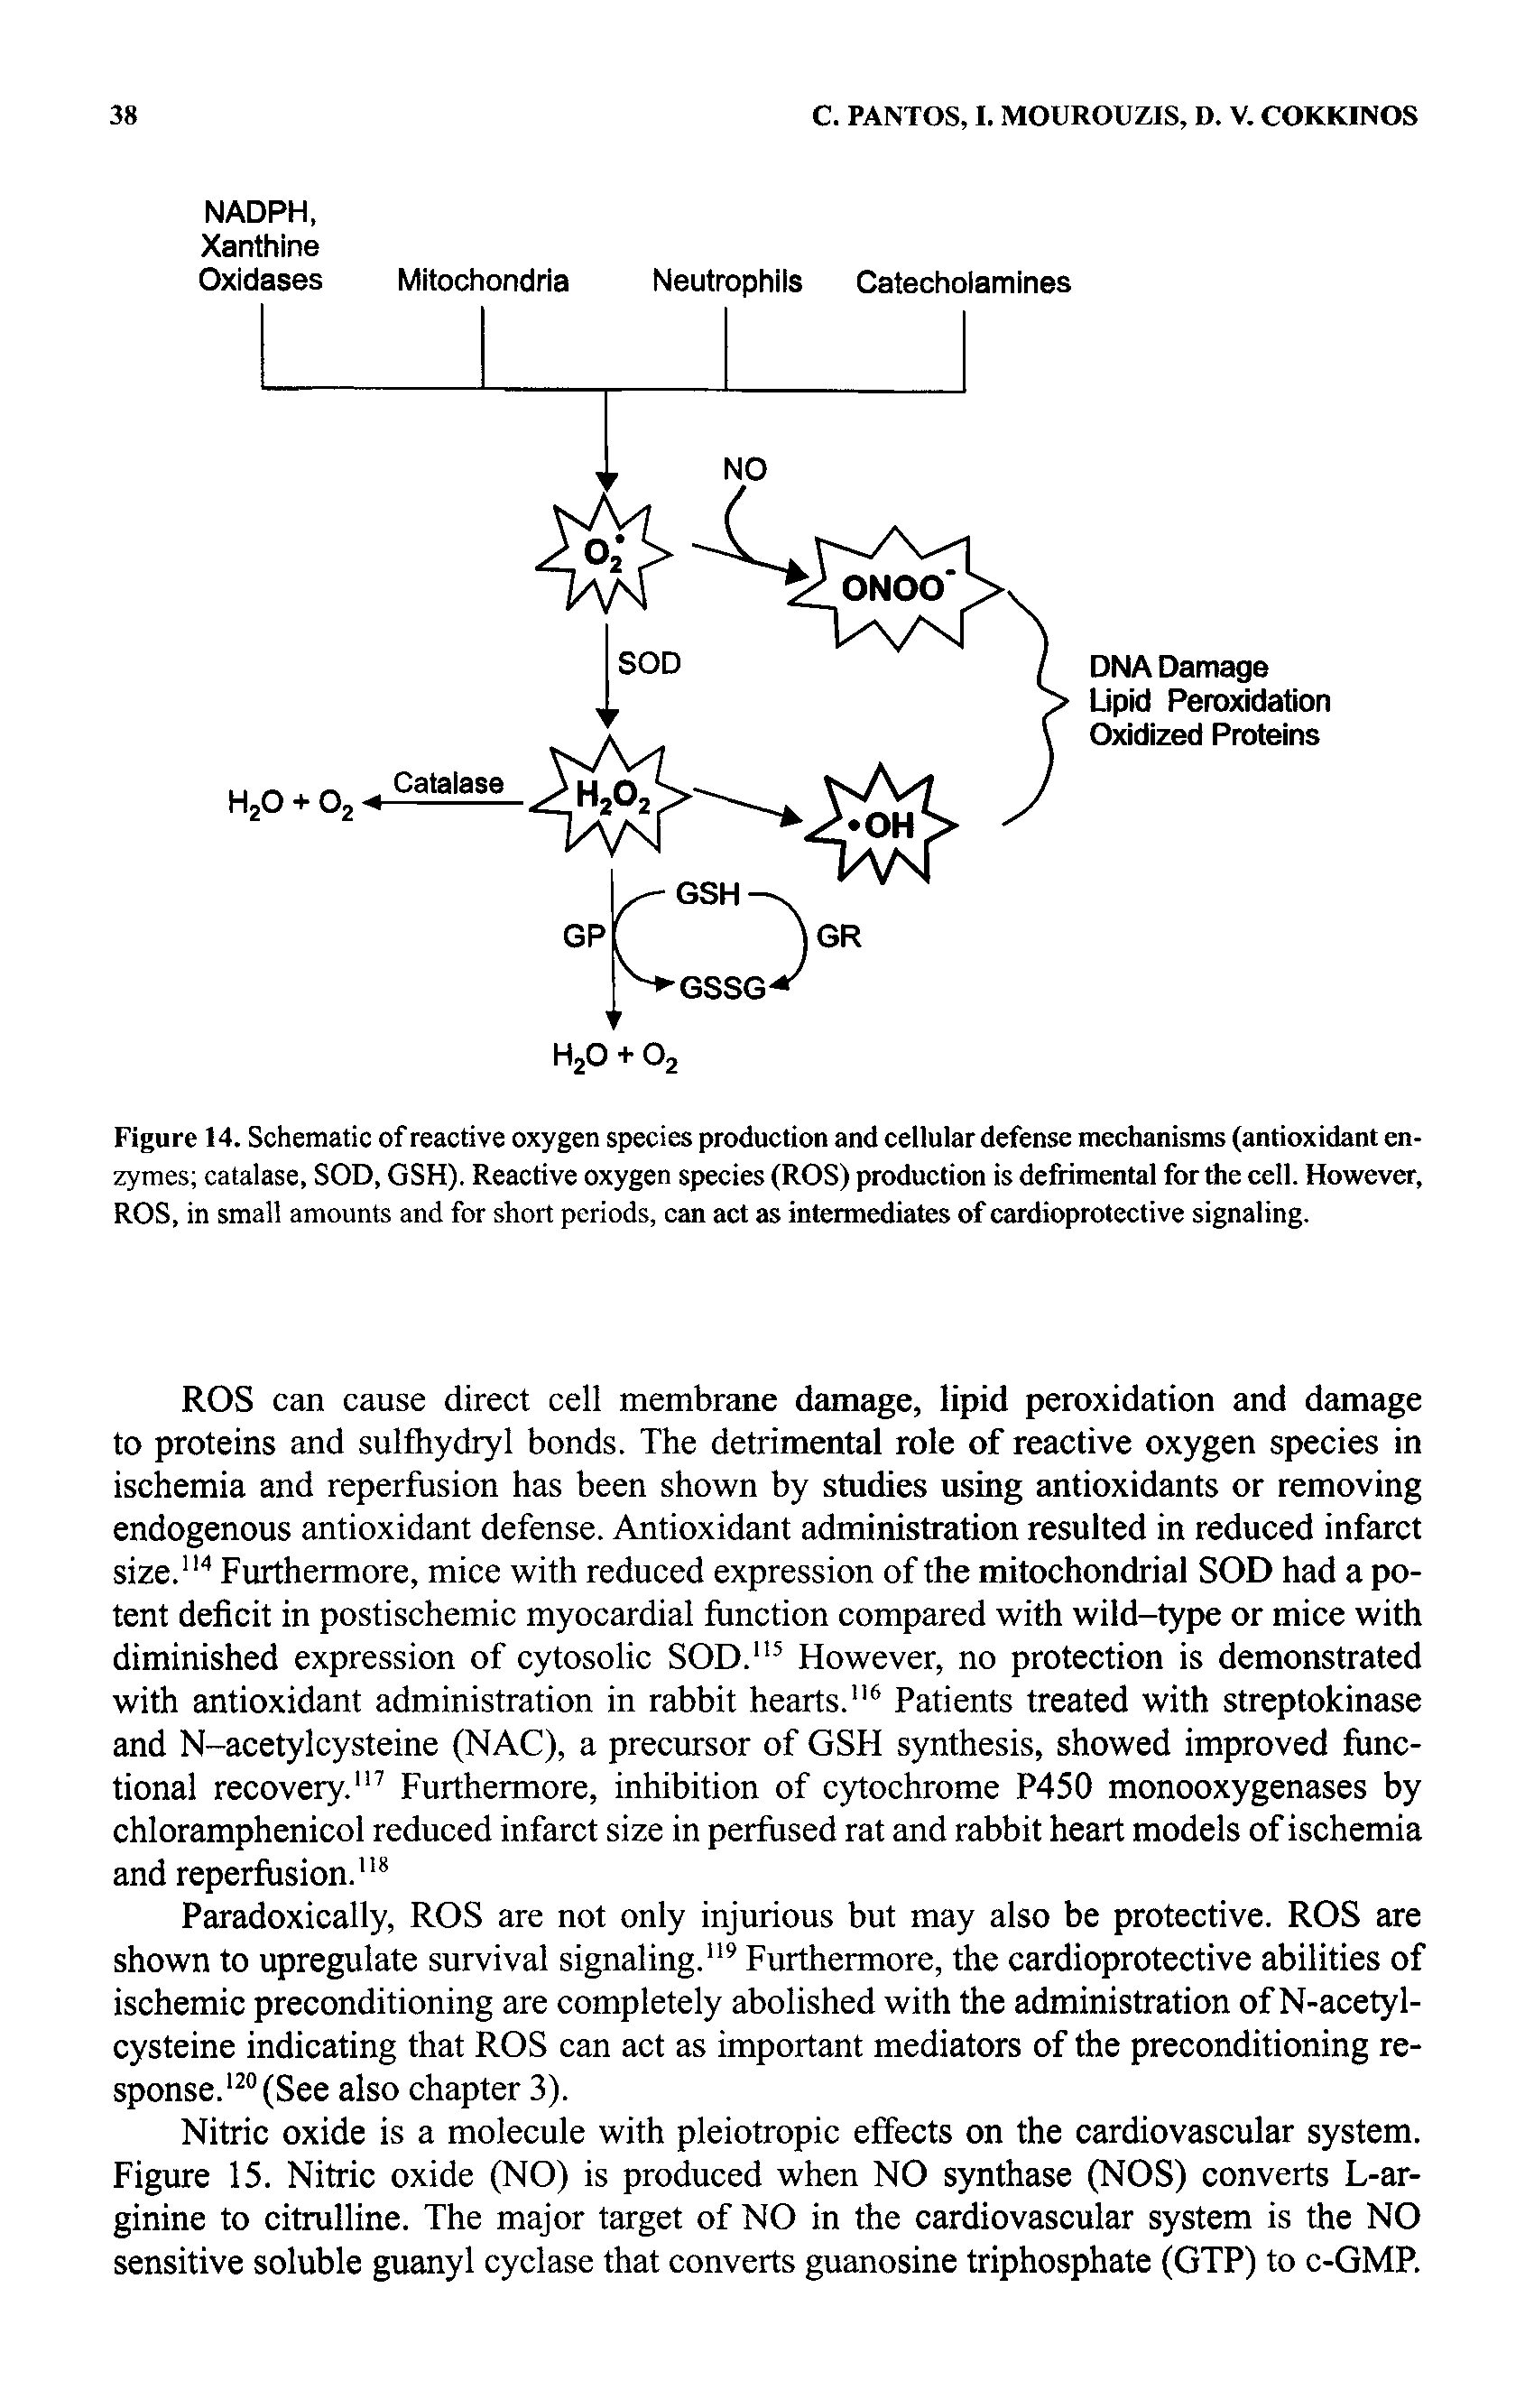 Figure 14. Schematic of reactive oxygen species production and cellular defense mechanisms (antioxidant enzymes catalase, SOD, GSH). Reactive oxygen species (ROS) production is detrimental for the cell. However, ROS, in small amounts and for short periods, can act as intermediates of cardioprotective signaling.